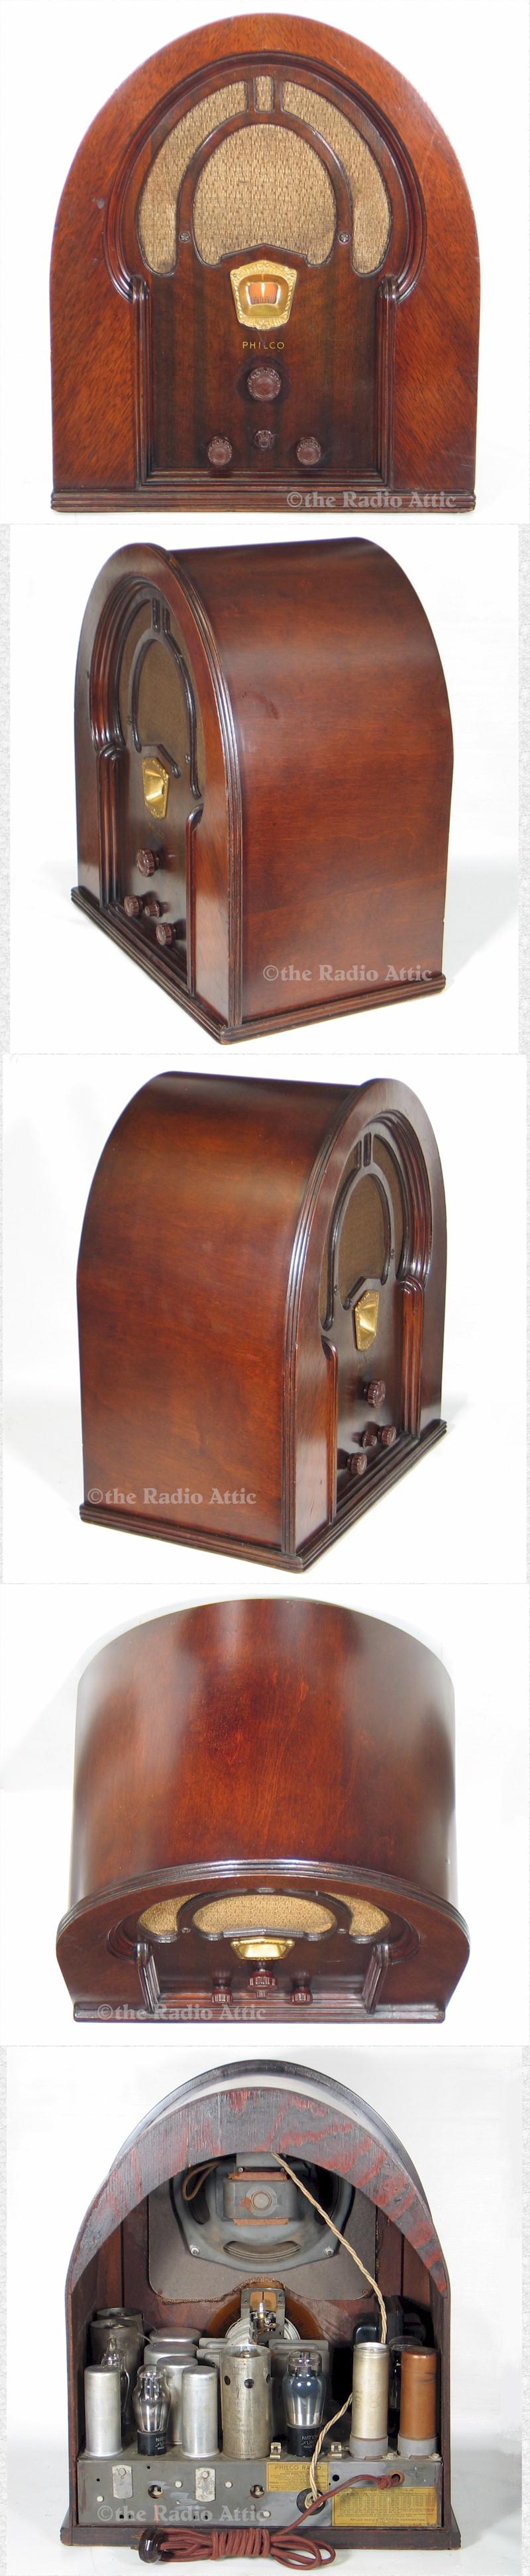 Philco 71B Cathedral (1932)